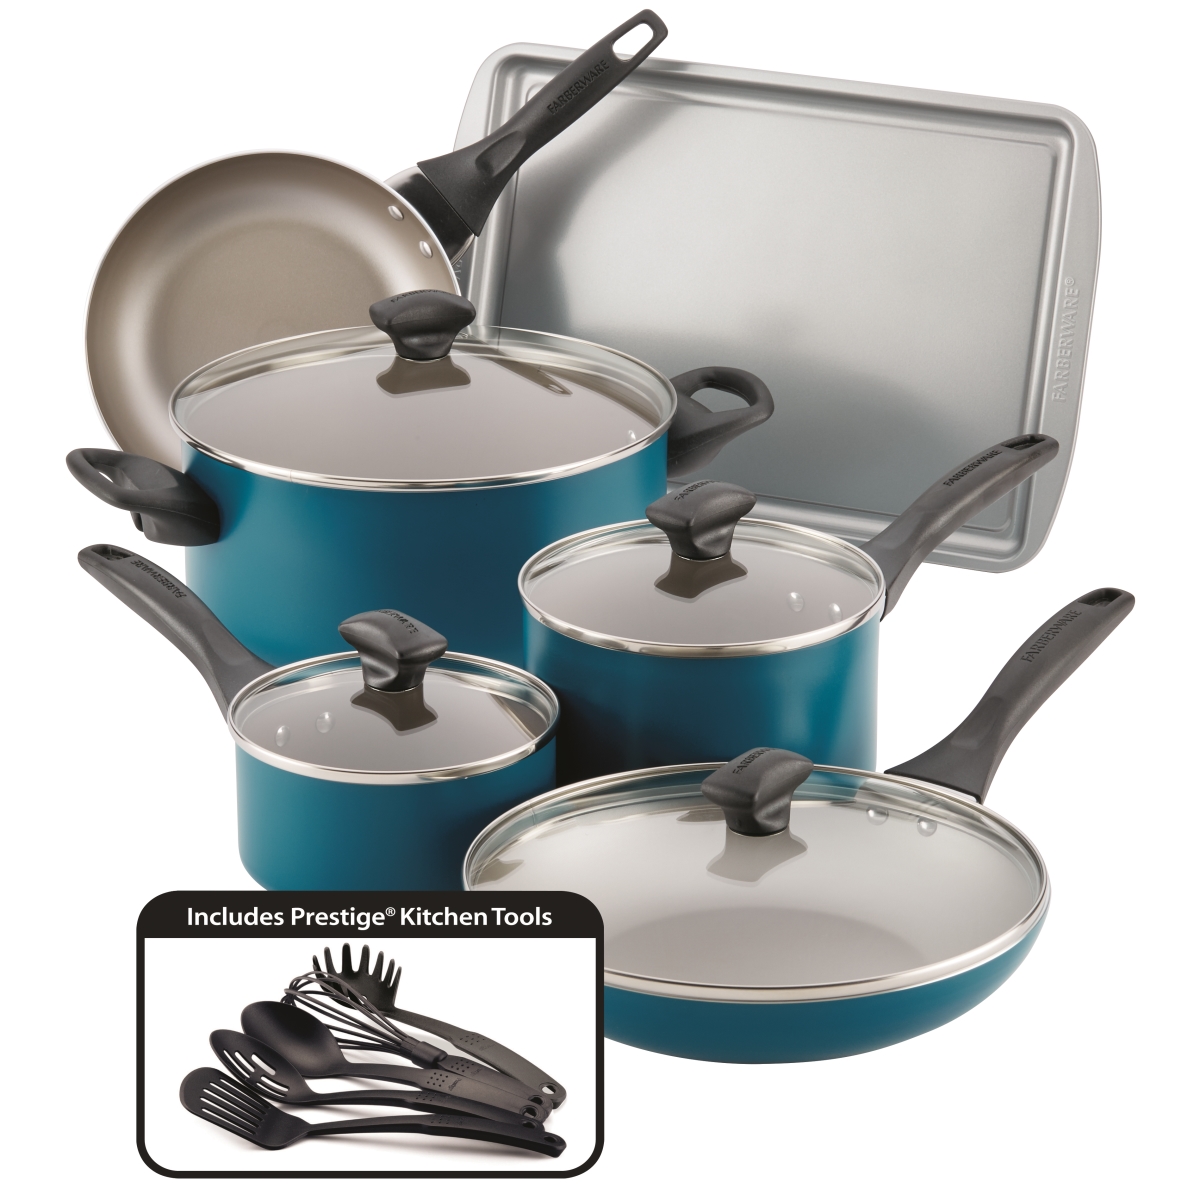 Picture of Farberware 20361 Dishwasher Safe Nonstick Cookware Set, Teal - 15 Piece